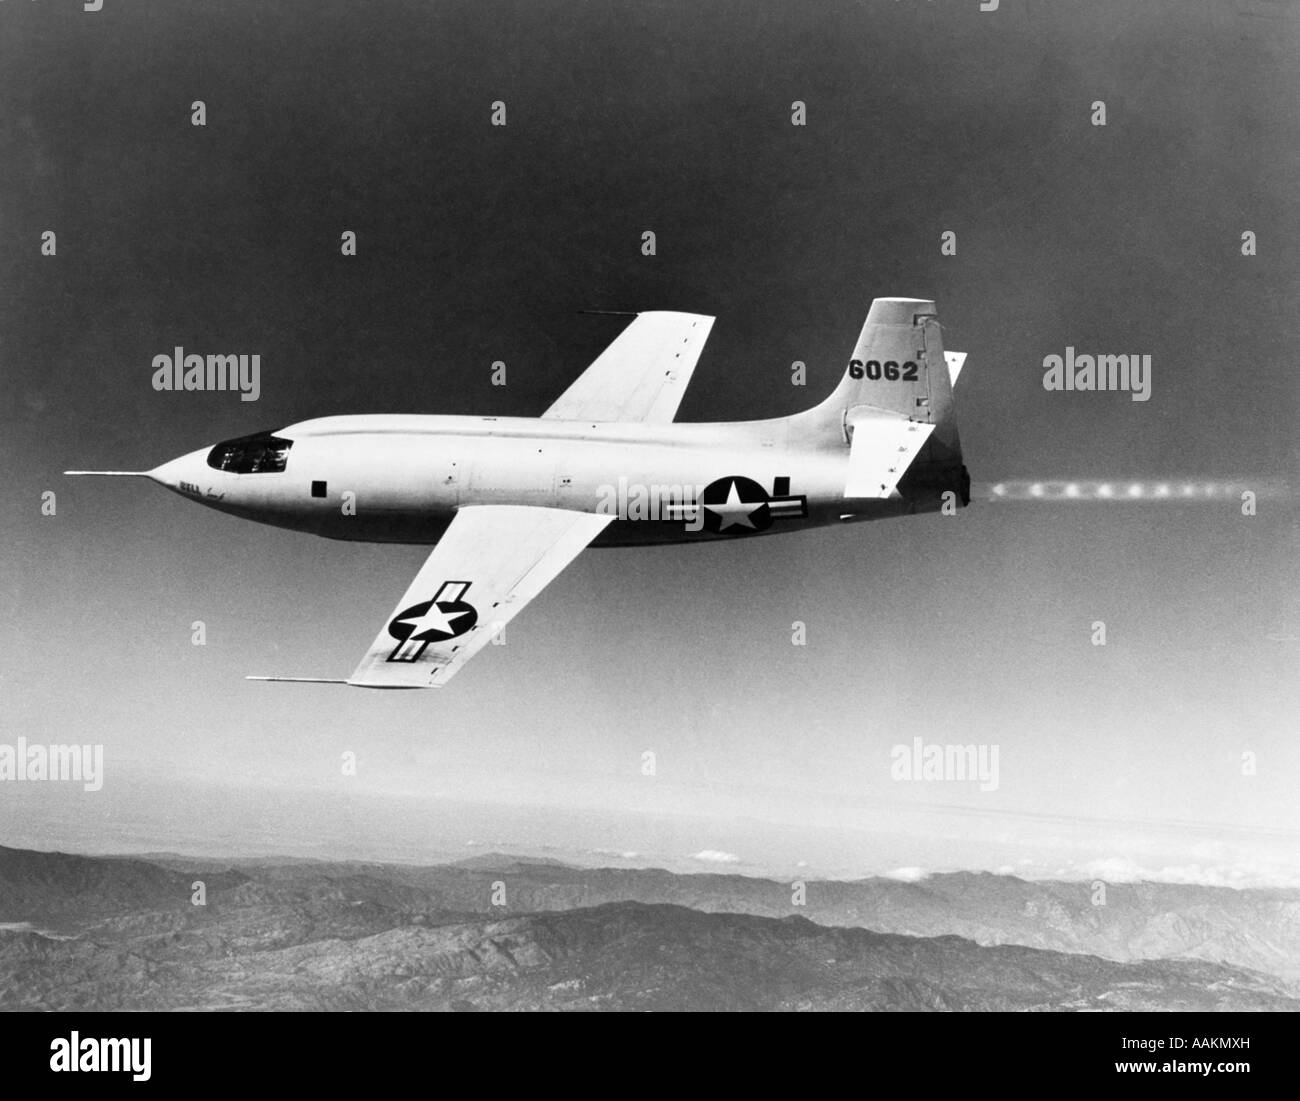 1940s 1950s BELL X-1 US AIR FORCE SUPERSONIC PLANE DESIGNED FOR MAXIMUM SPEED OF 1700 MPH IN FLIGHT Stock Photo